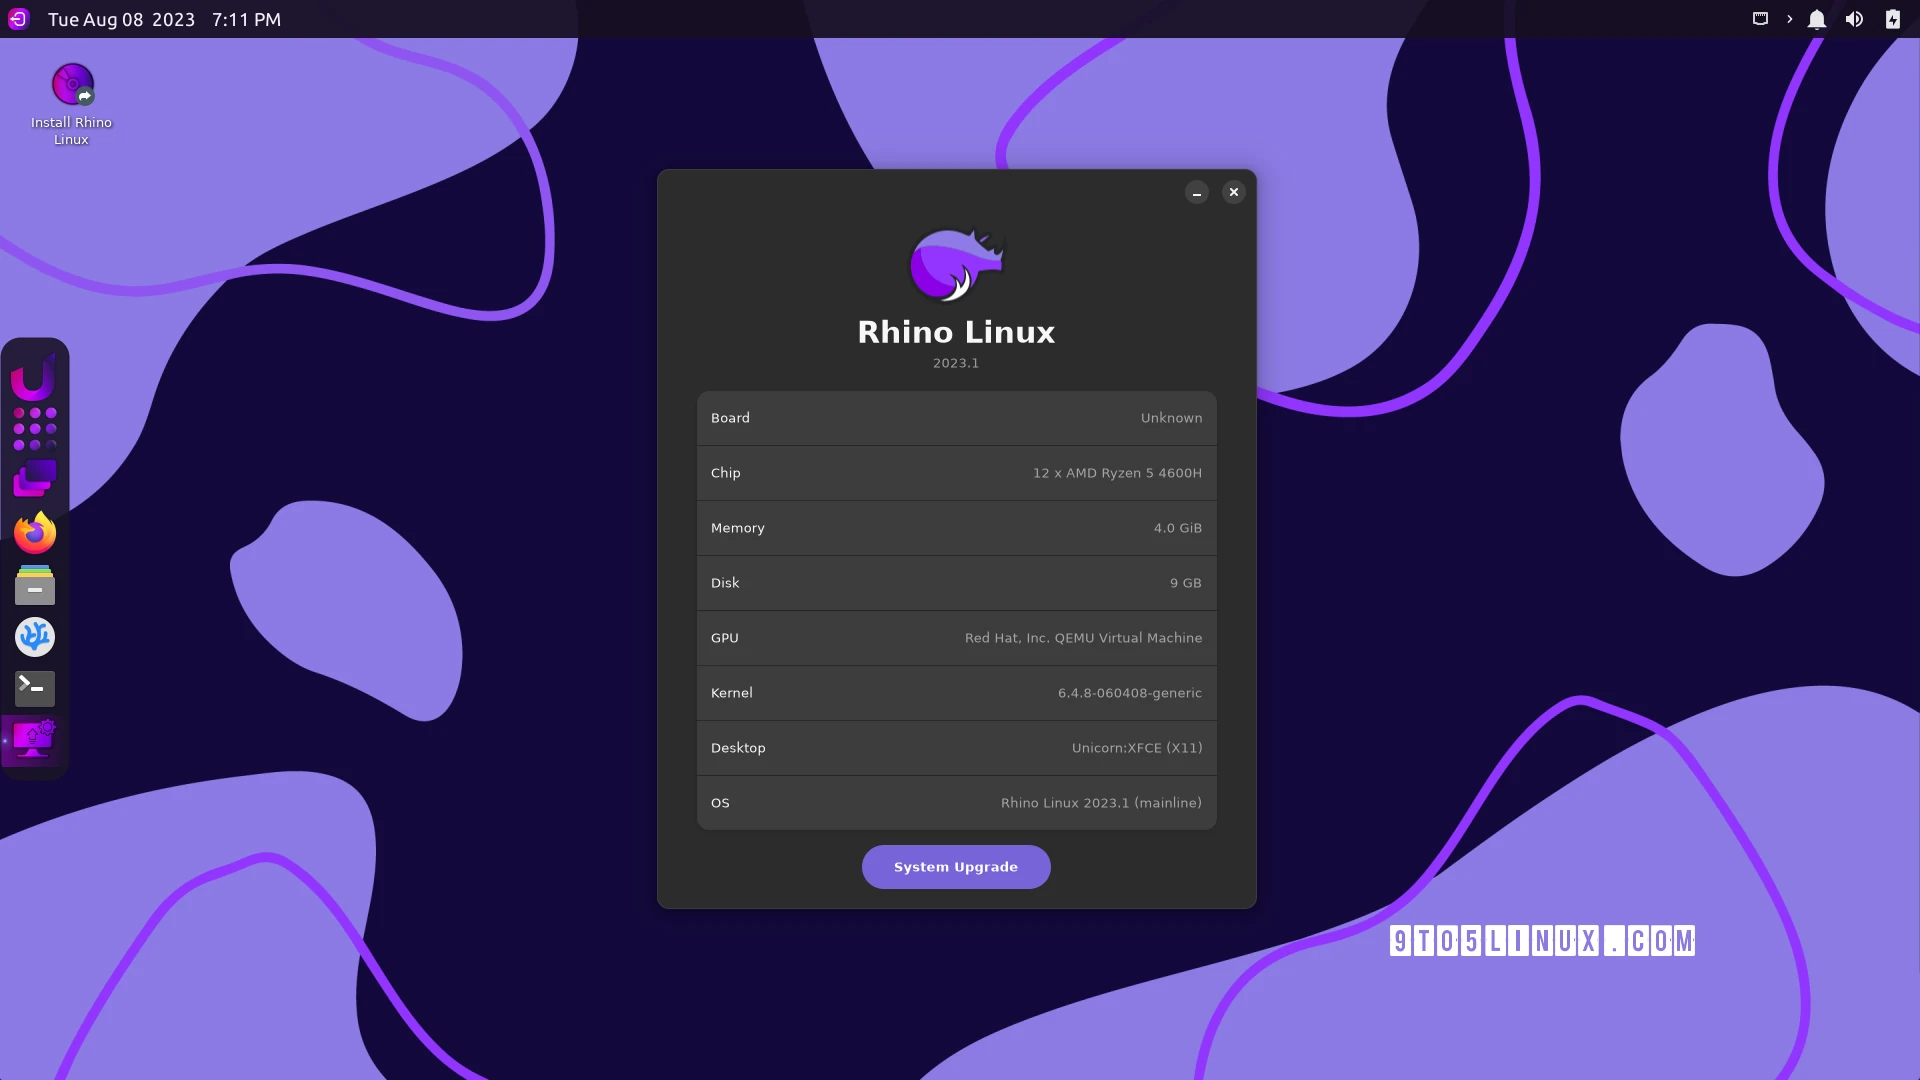 First Look at Rhino Linux, a Rolling-Release Distro Based on Ubuntu and Xfce